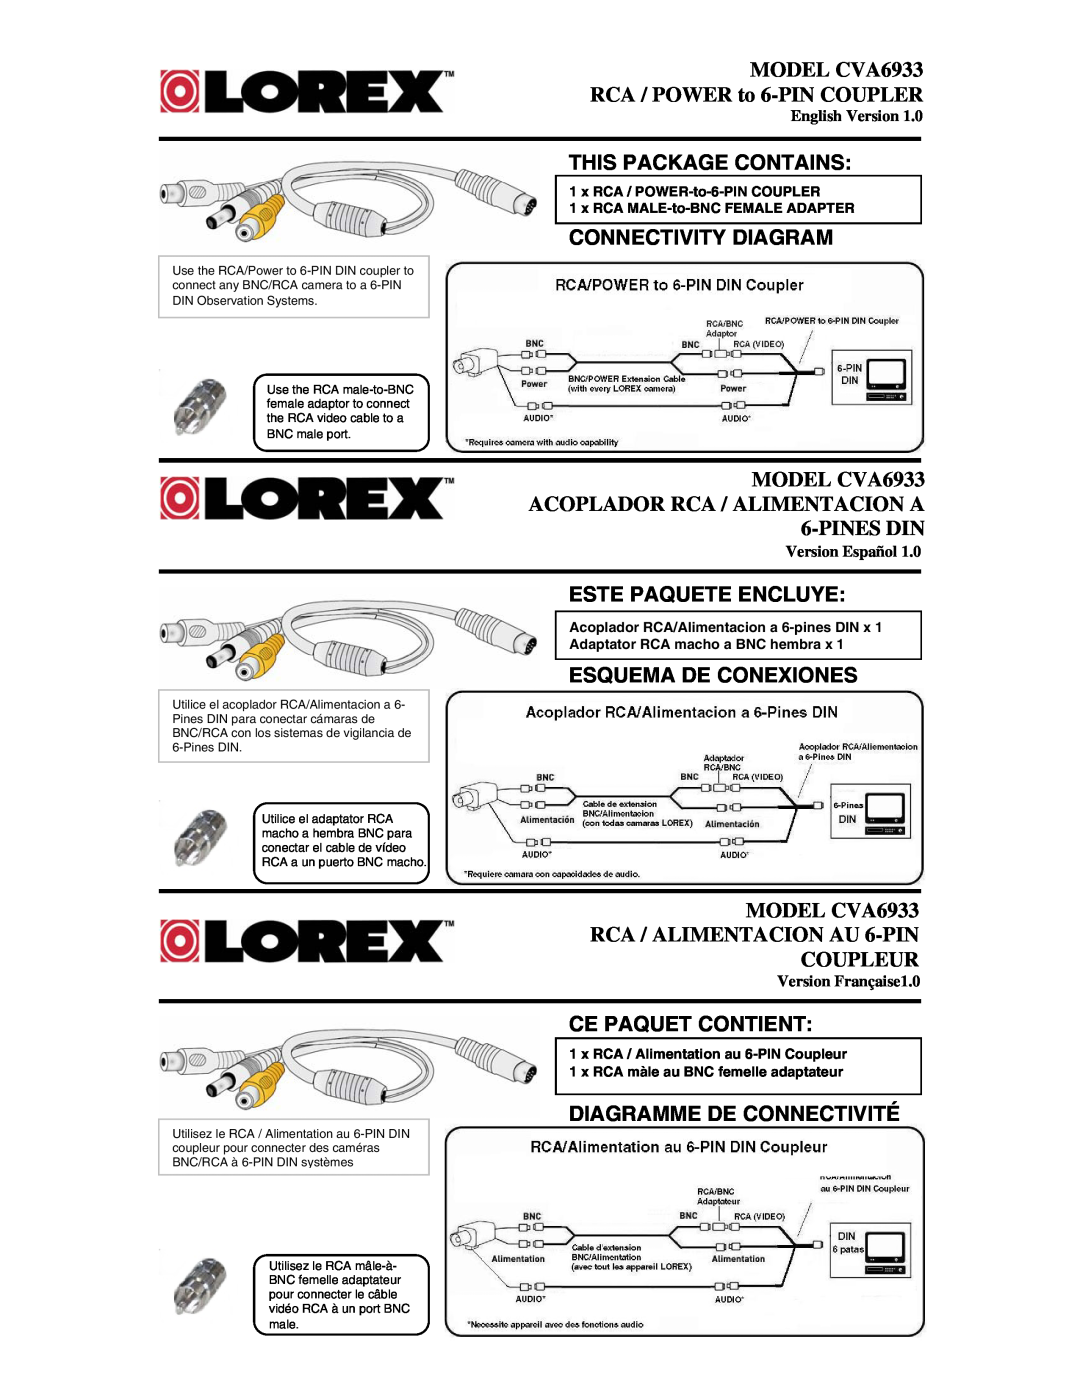 LOREX Technology manual MODEL CVA6933 RCA / POWER to 6-PIN COUPLER, This Package Contains, Connectivity Diagram 